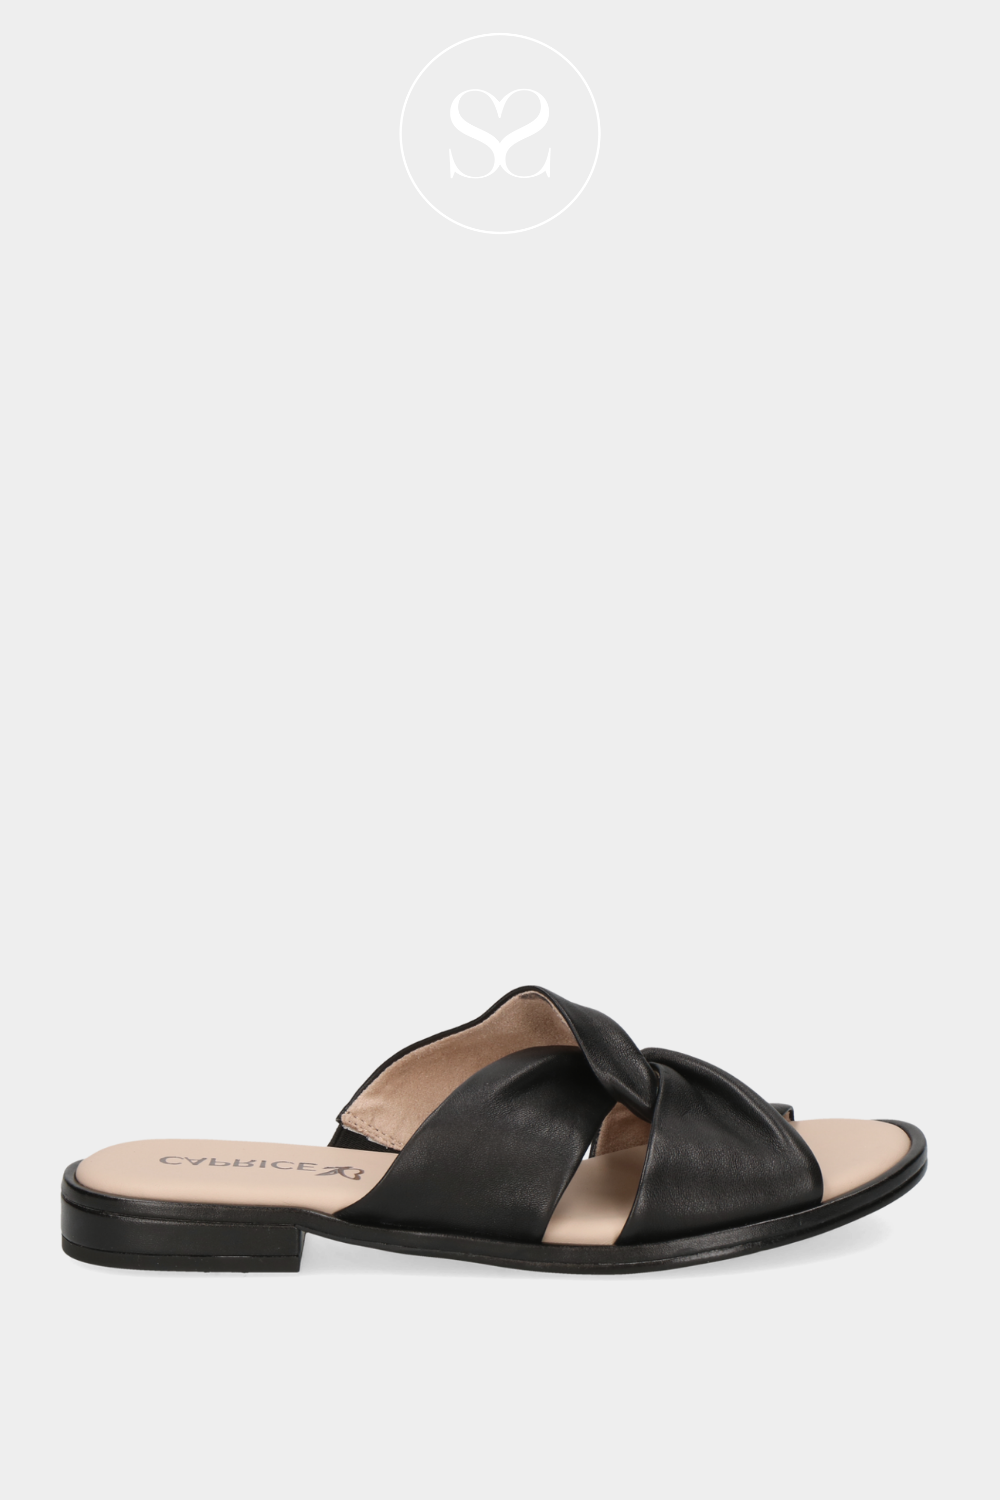 CAPRICE 9-27100-42 BLACK LEATHER FLAT SLIP ON SLIDERS WITH CRISS CROSS STRAPS